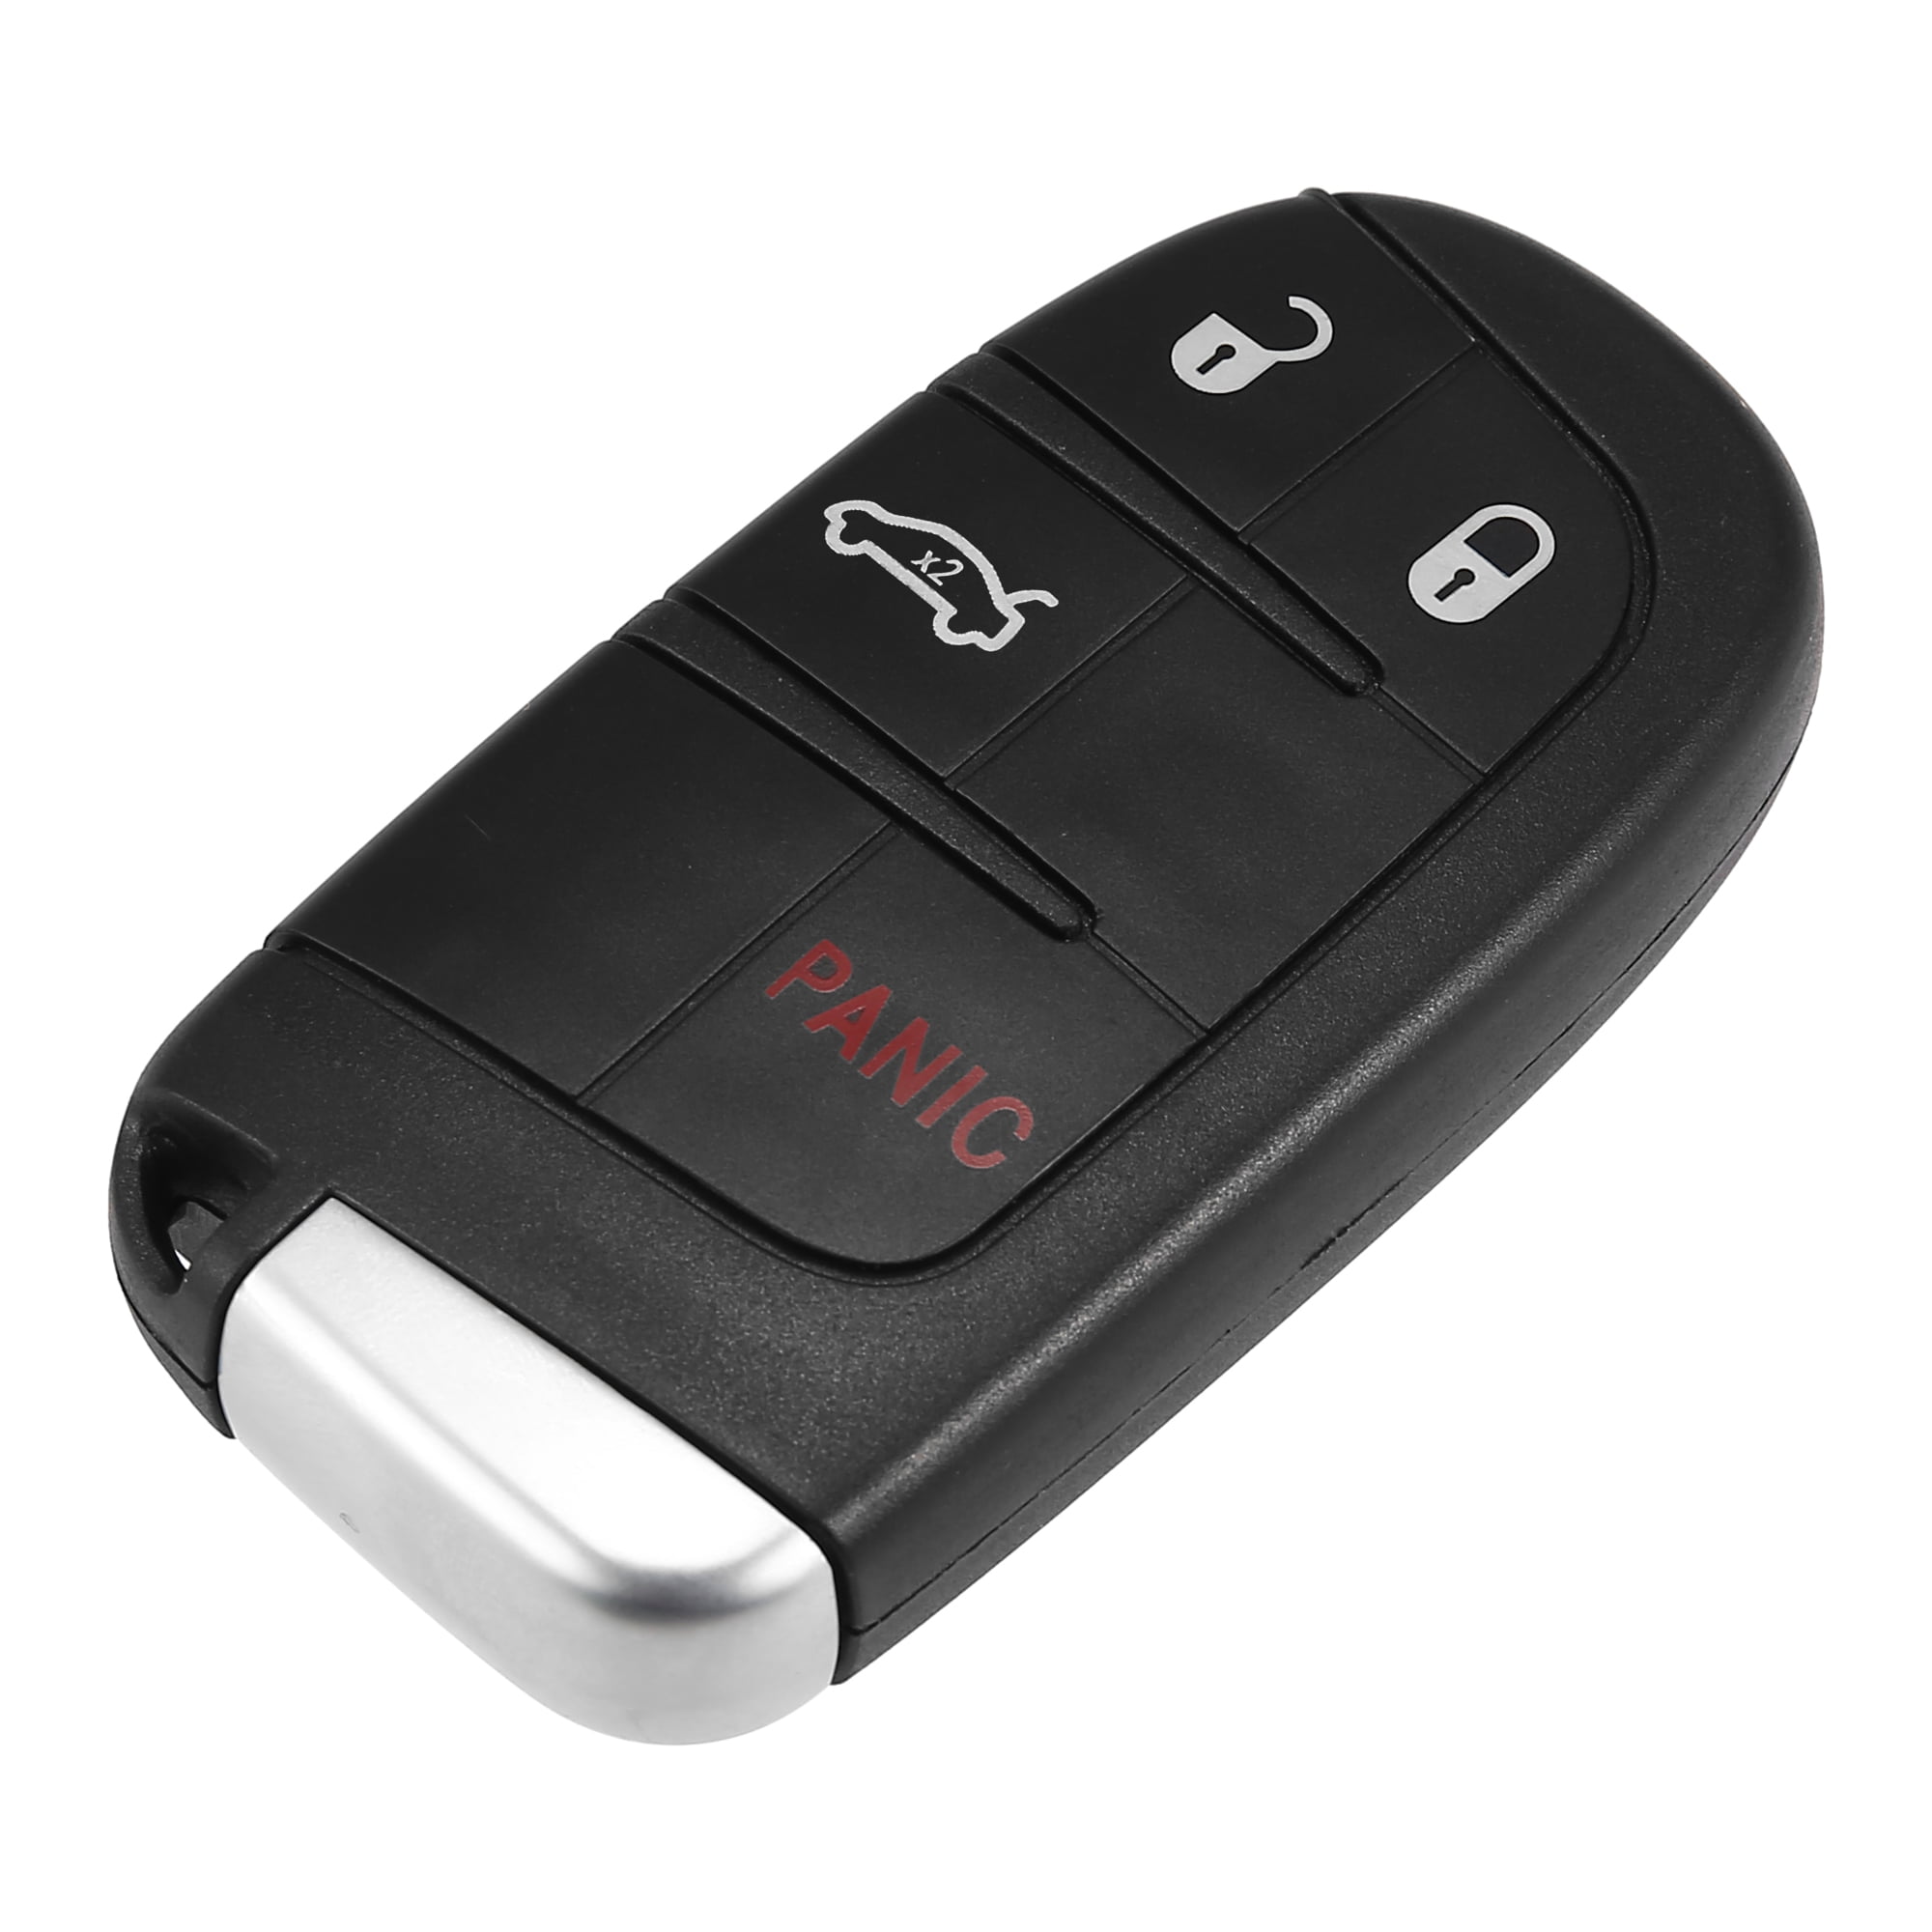 Replacement Key Fobs From Keyless Entry Remote Inc - Shop and Order Online